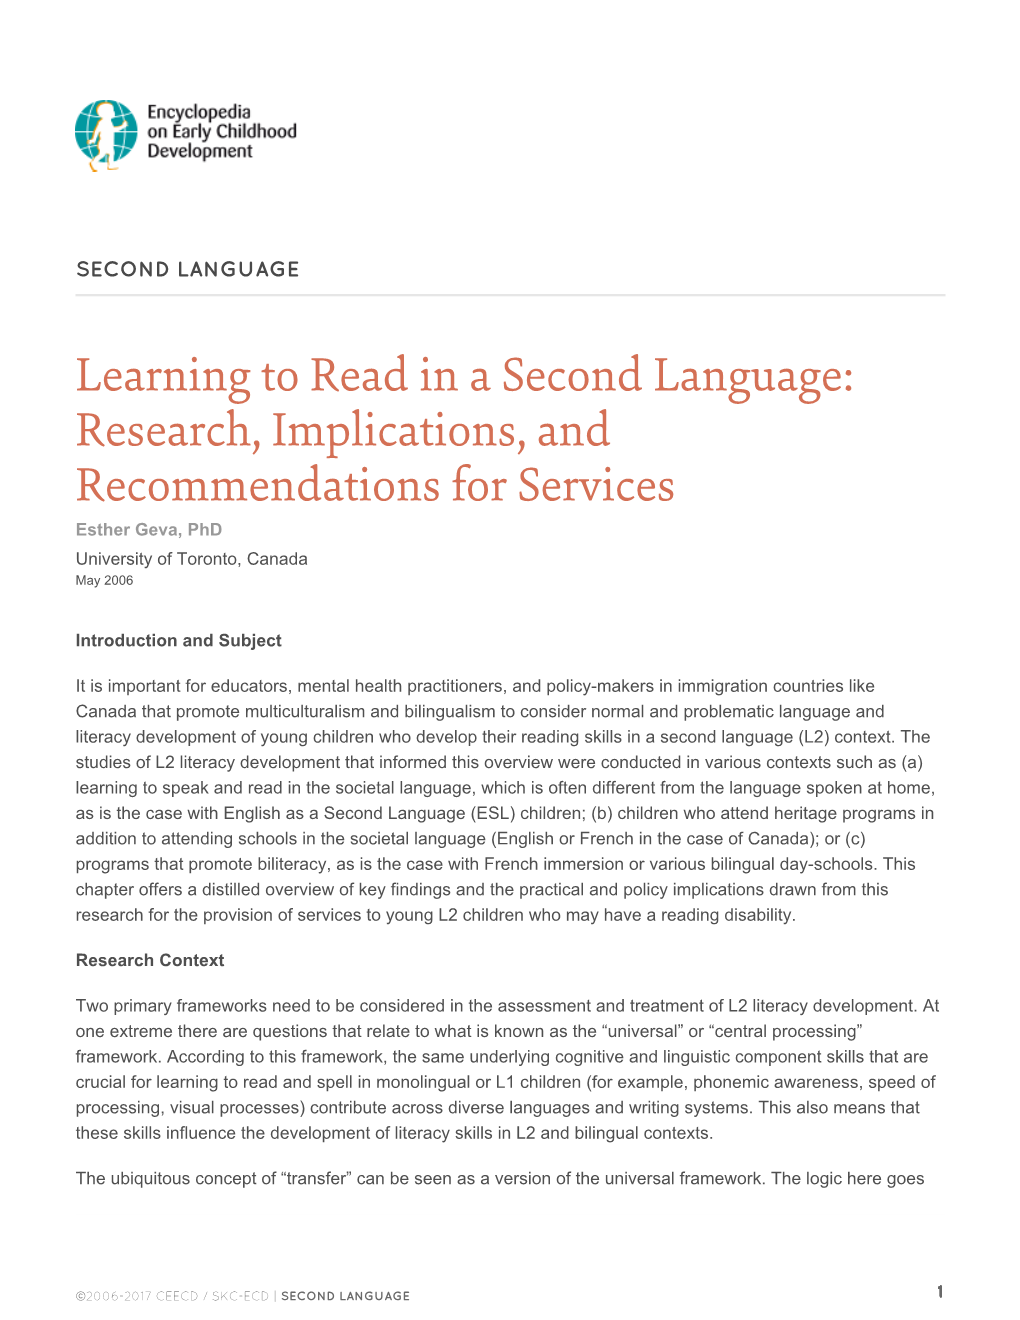 Learning to Read in a Second Language: Research, Implications, and Recommendations for Services Esther Geva, Phd University of Toronto, Canada May 2006